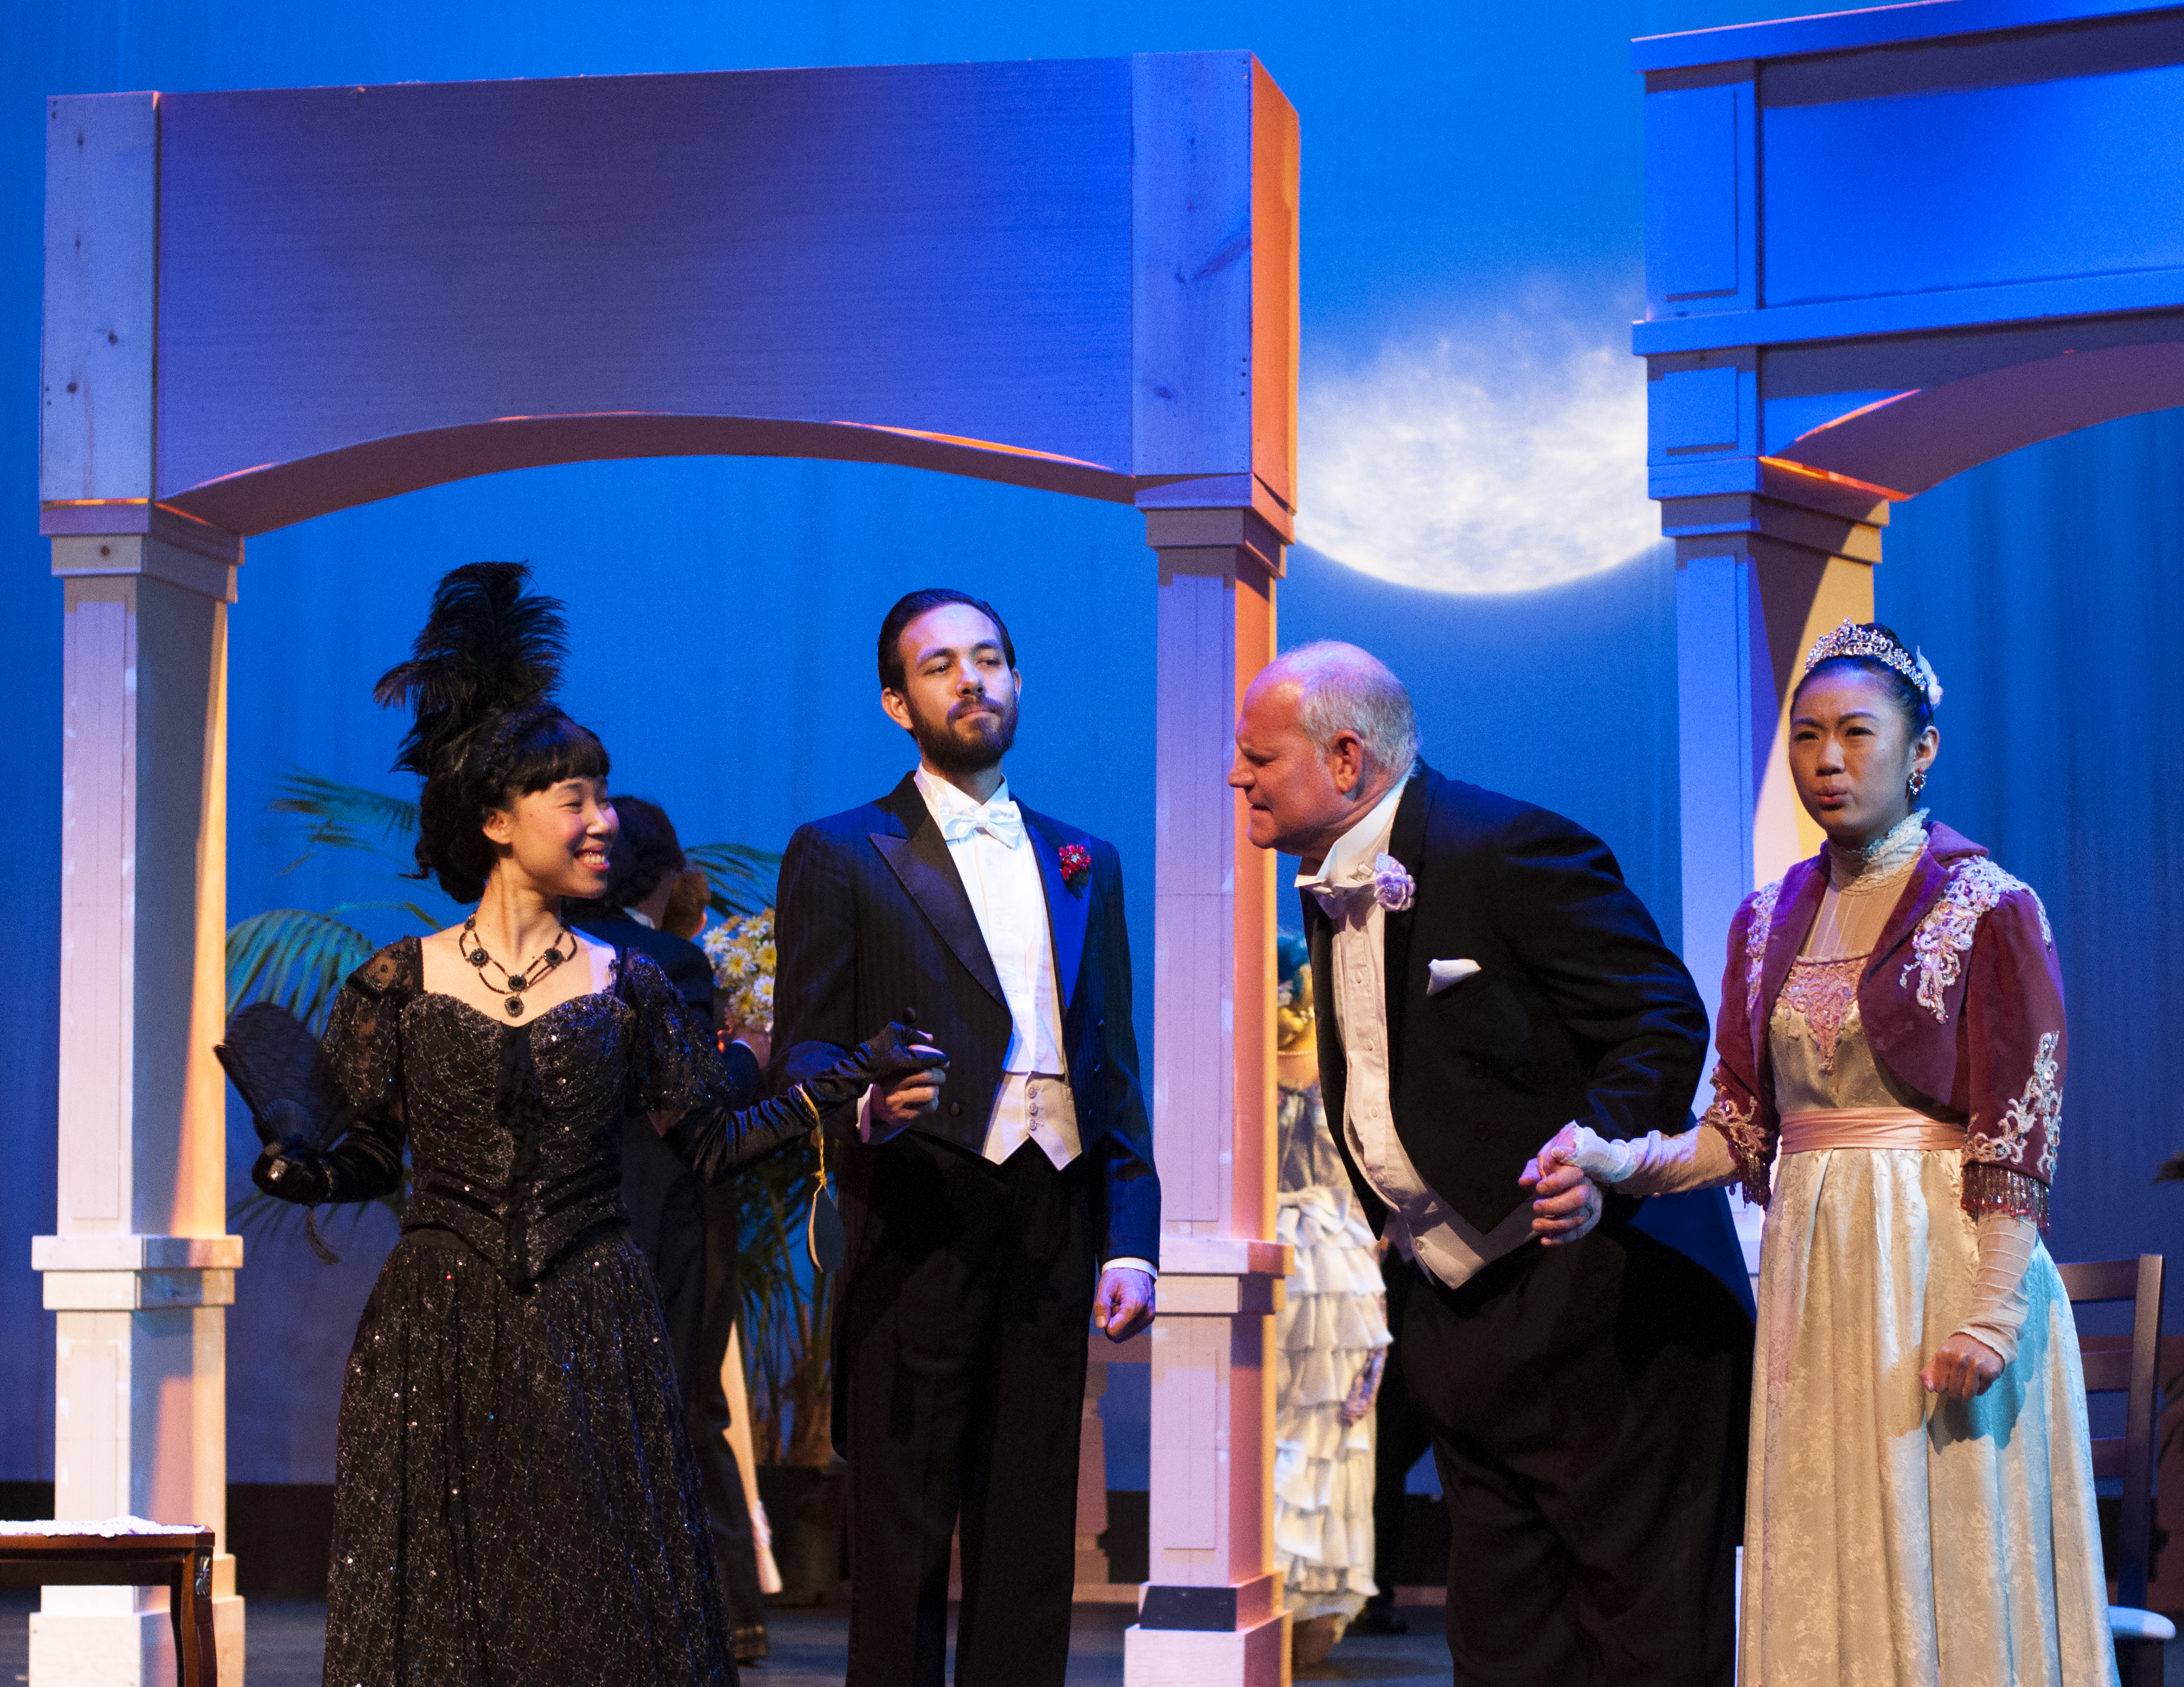 Violet Yung (left to right) as Lady Agatha Carlisle, Alixandra Todd as Lady Windermere, Lisa Bettini as The Duchess of Berwick and Robert Ayala as Lord Darlington during the dress rehearsal of the production Lady Windermere’s Fan directed by John Wilk at The Diego Rivera Theater in Ocean campus on Wednesday Feb. 27, 2018. Photo by Janeth R. Sanchez/The Guardsman.